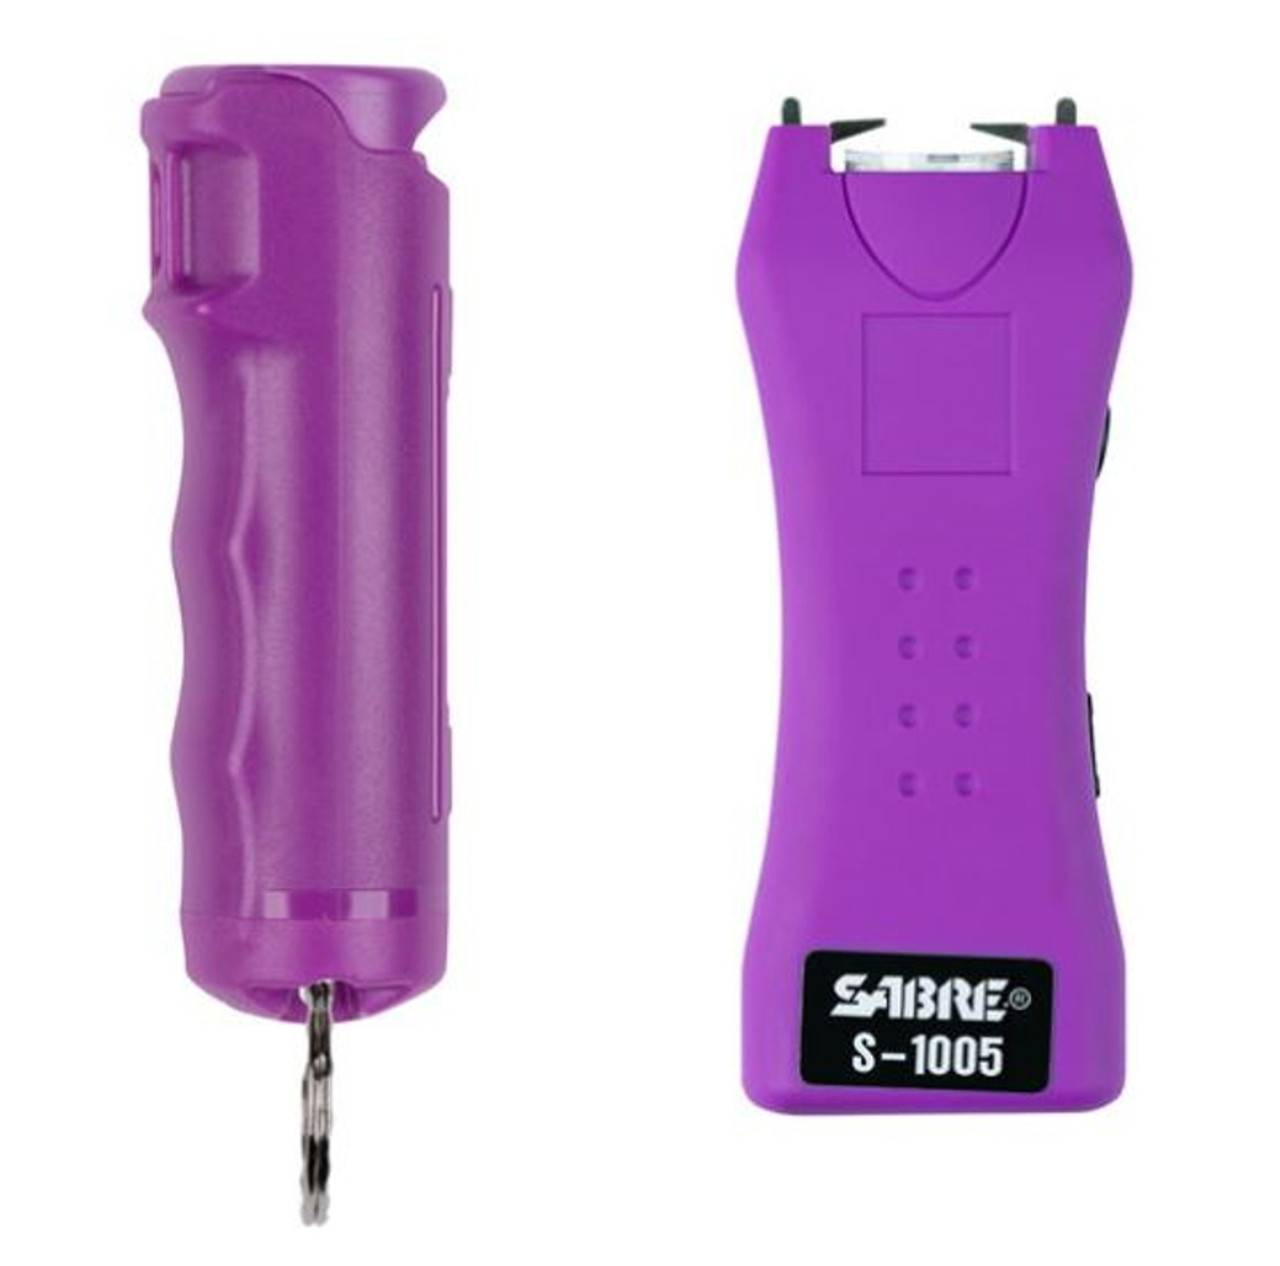 Mini Stun Gun and Pepper Spray for Self Defense-Extremely Powerful